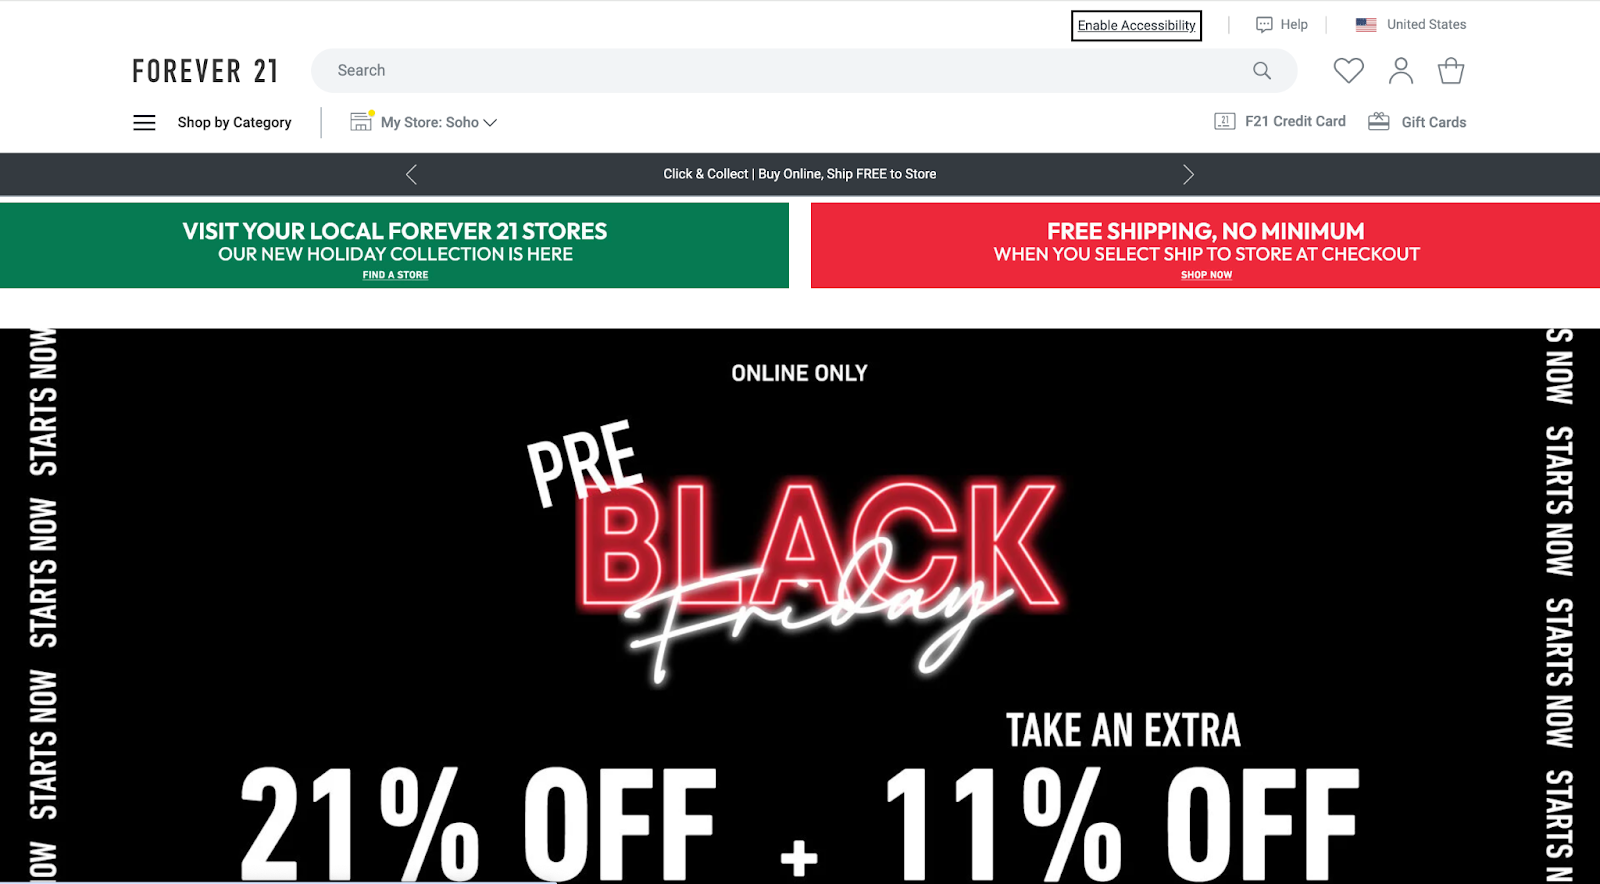 Forever 21 homepage